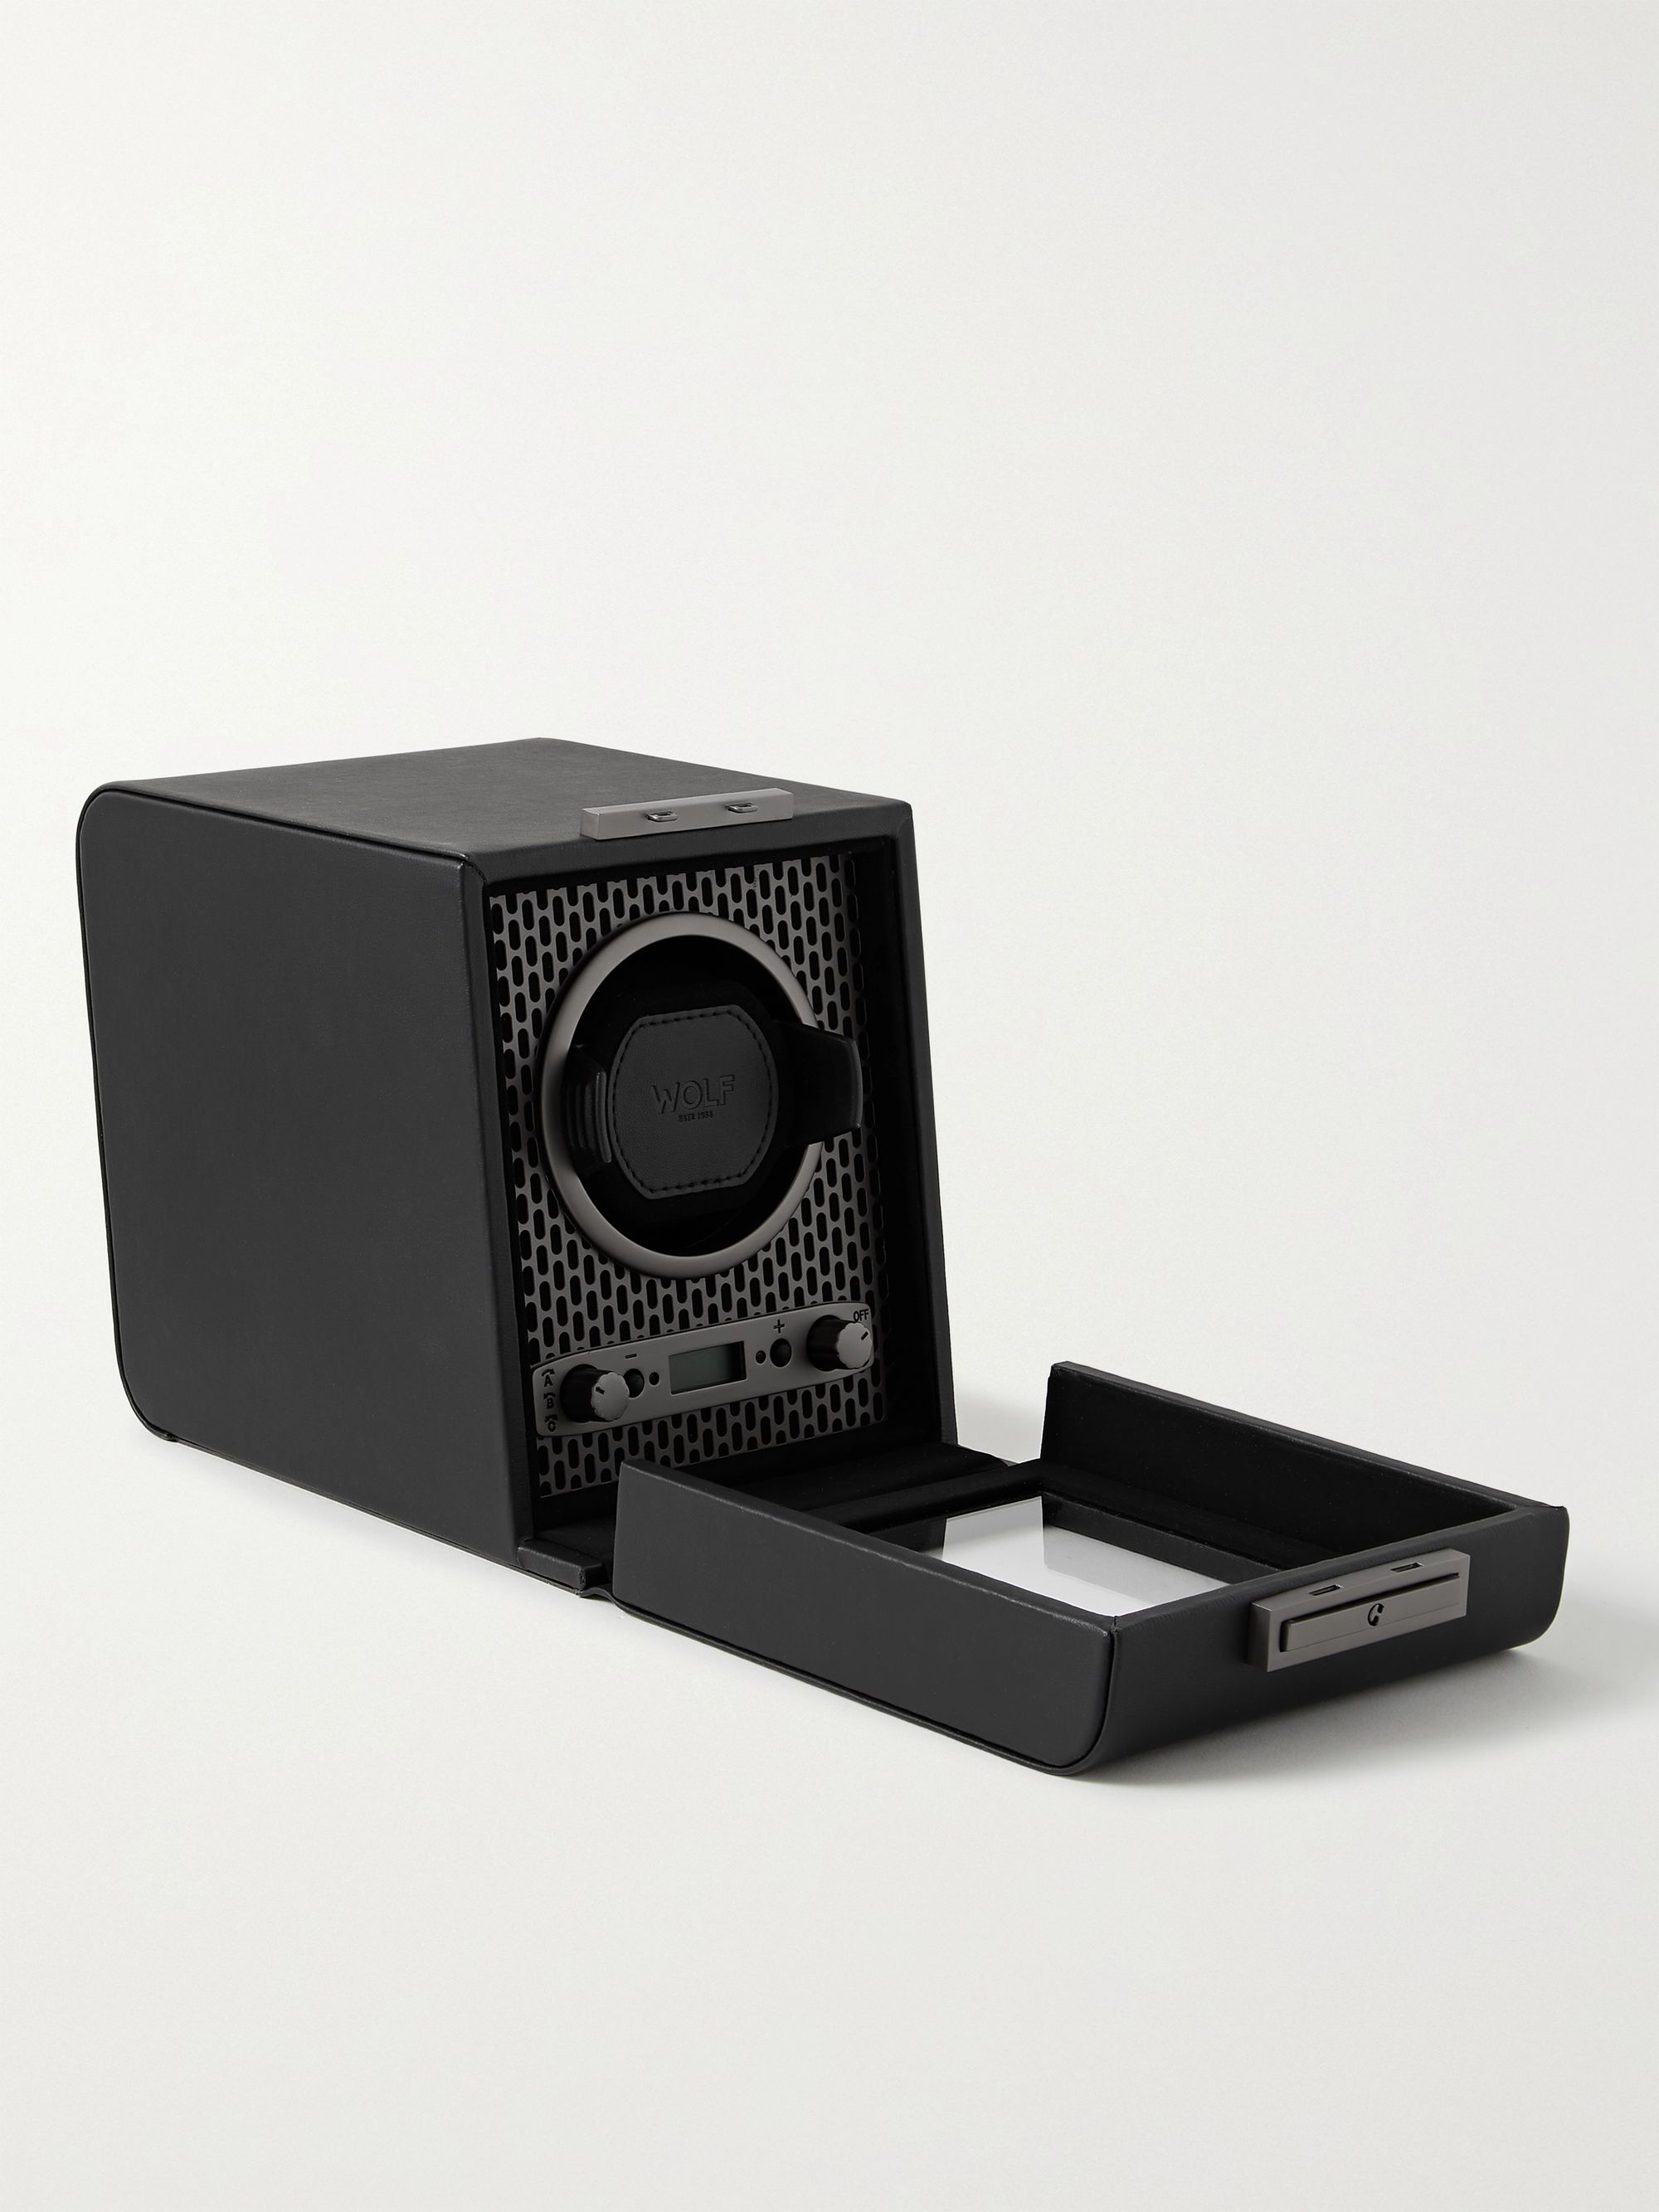 WOLF Axis Vegan Leather Single Watch Winder